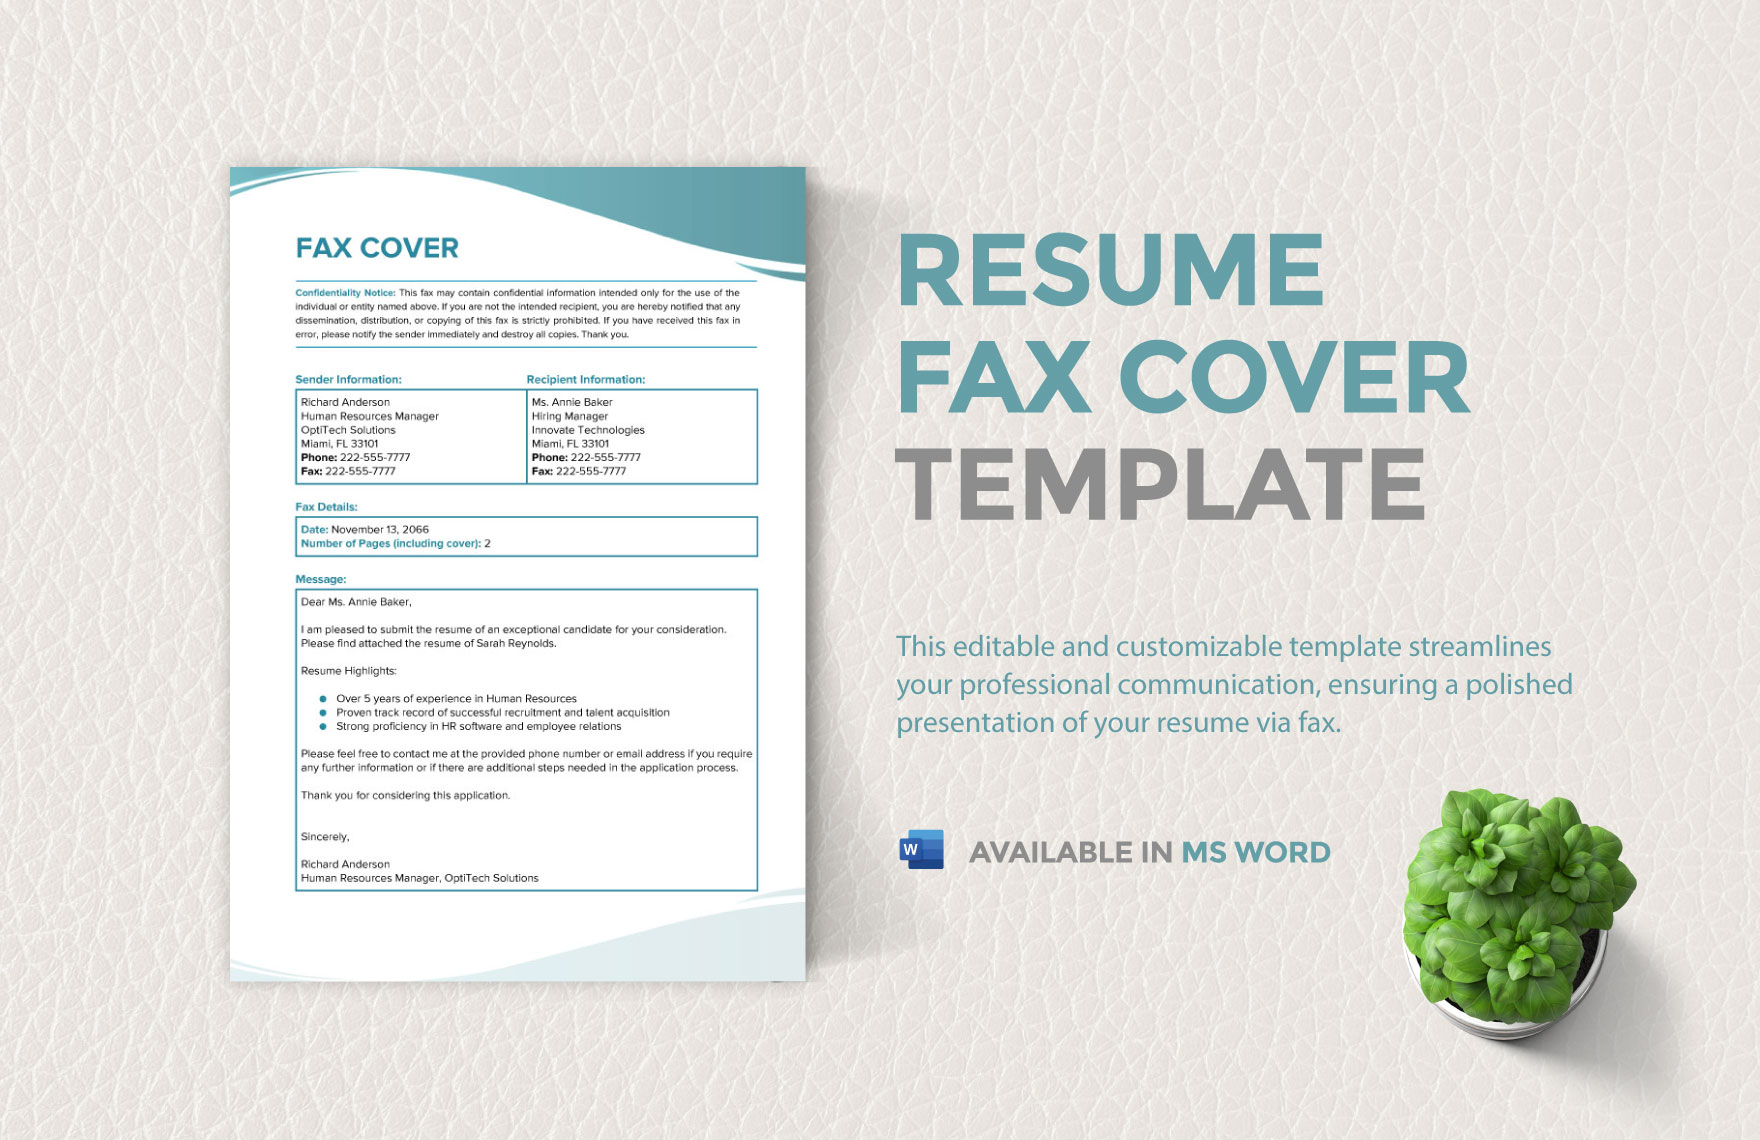 Resume Fax Cover Template